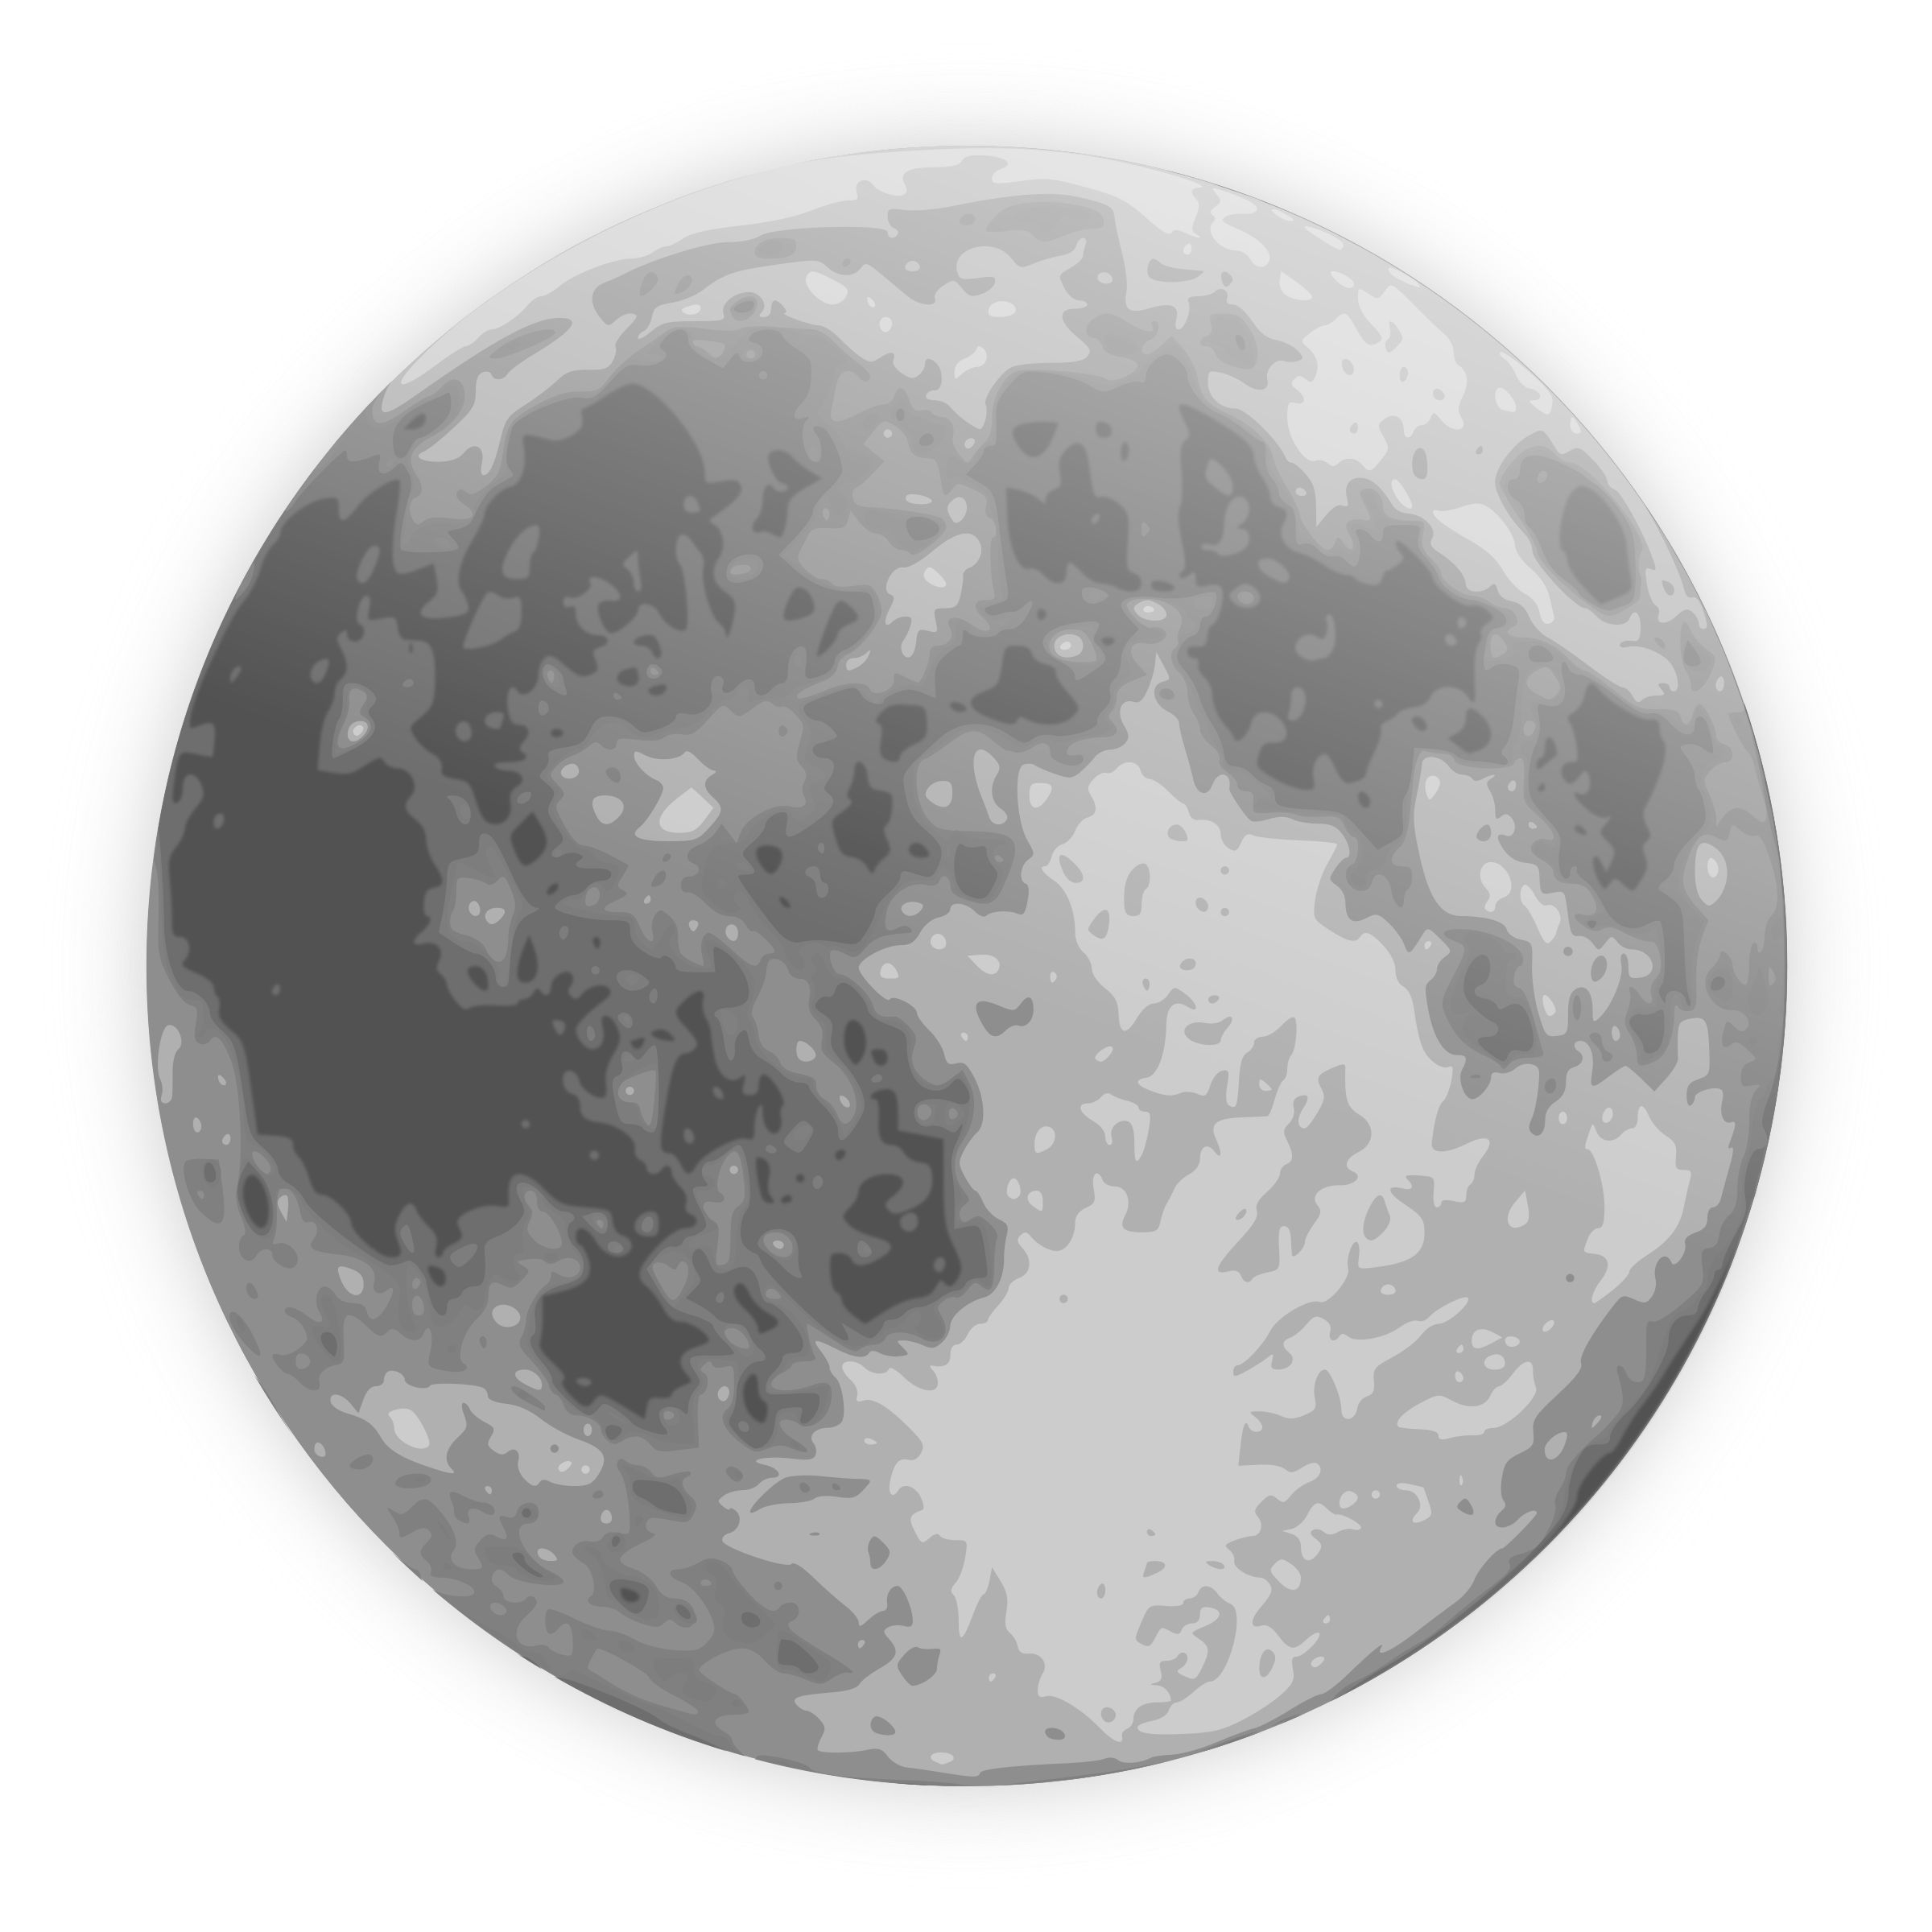 Png image web icons. Moon clipart transparent background